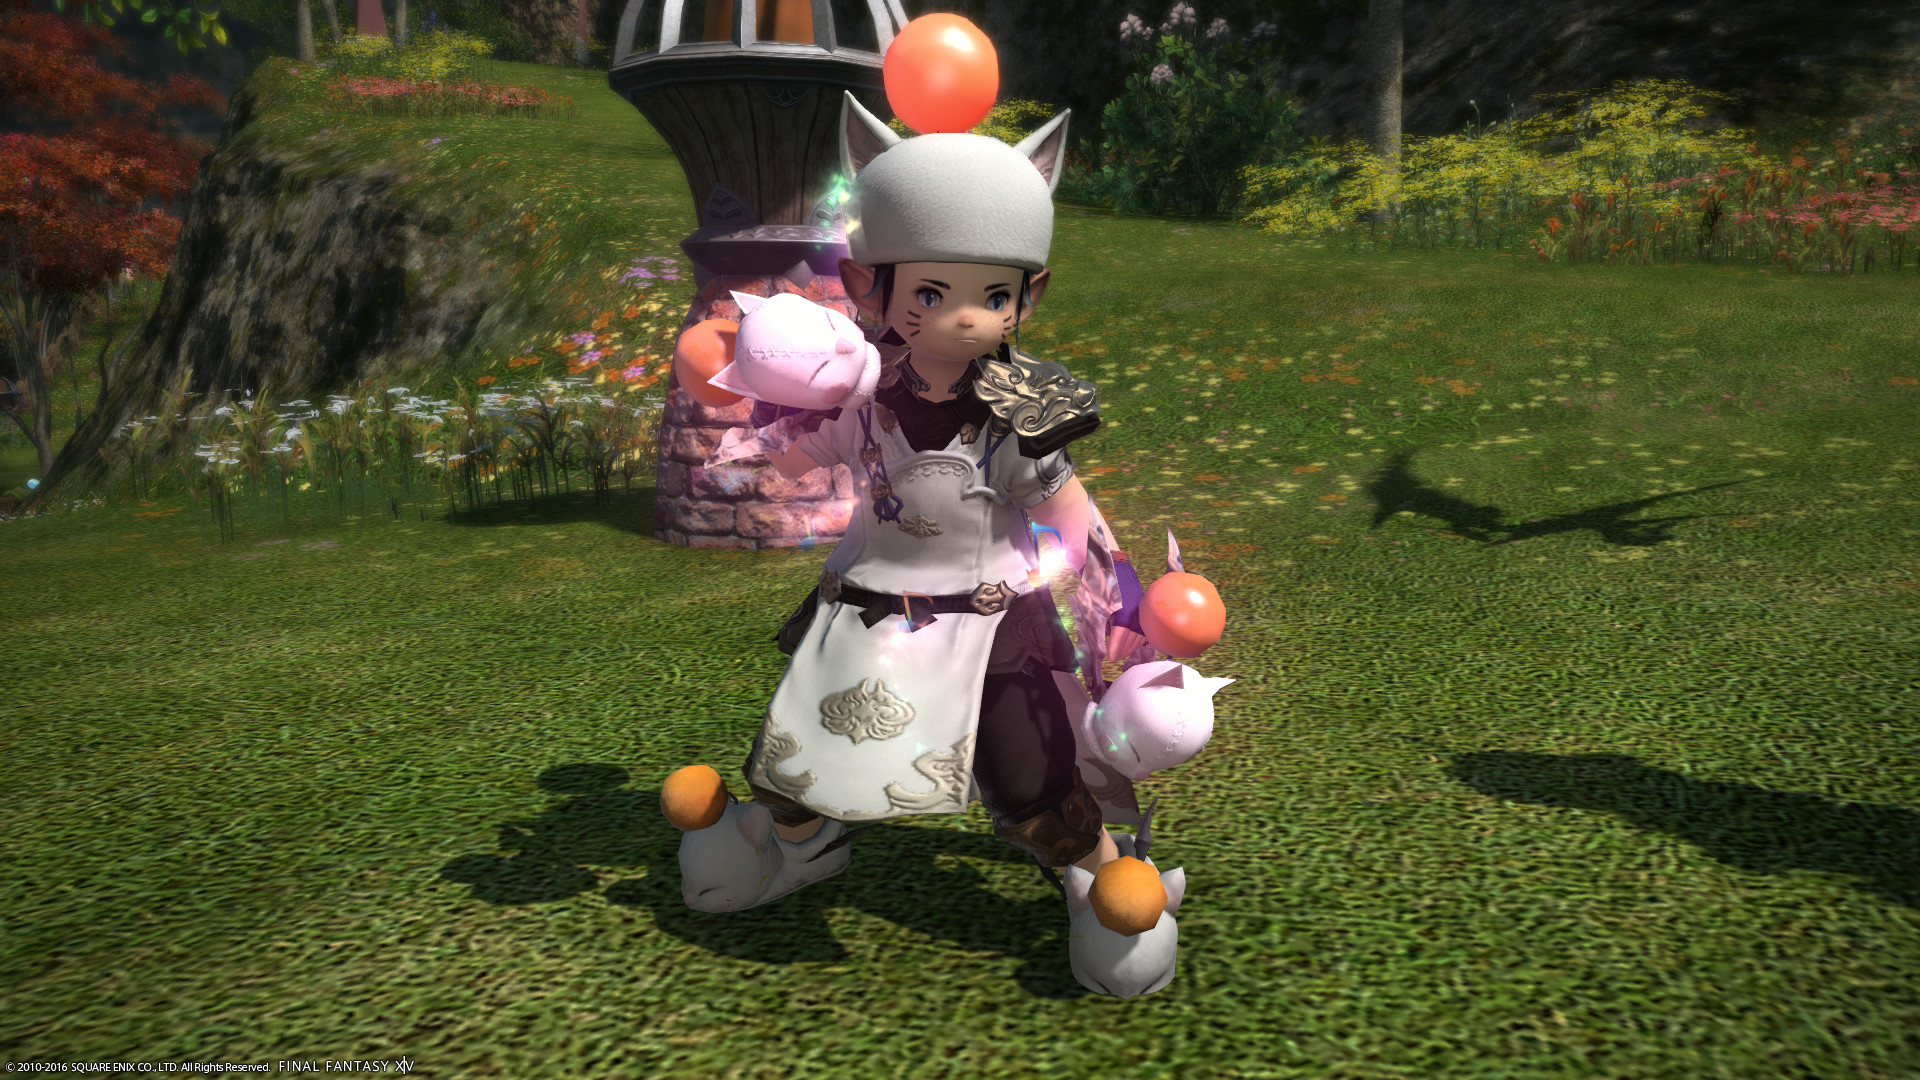 1920x1080 [Screenshot]Now my glamour is complete! Punch and Kick in moogle style!